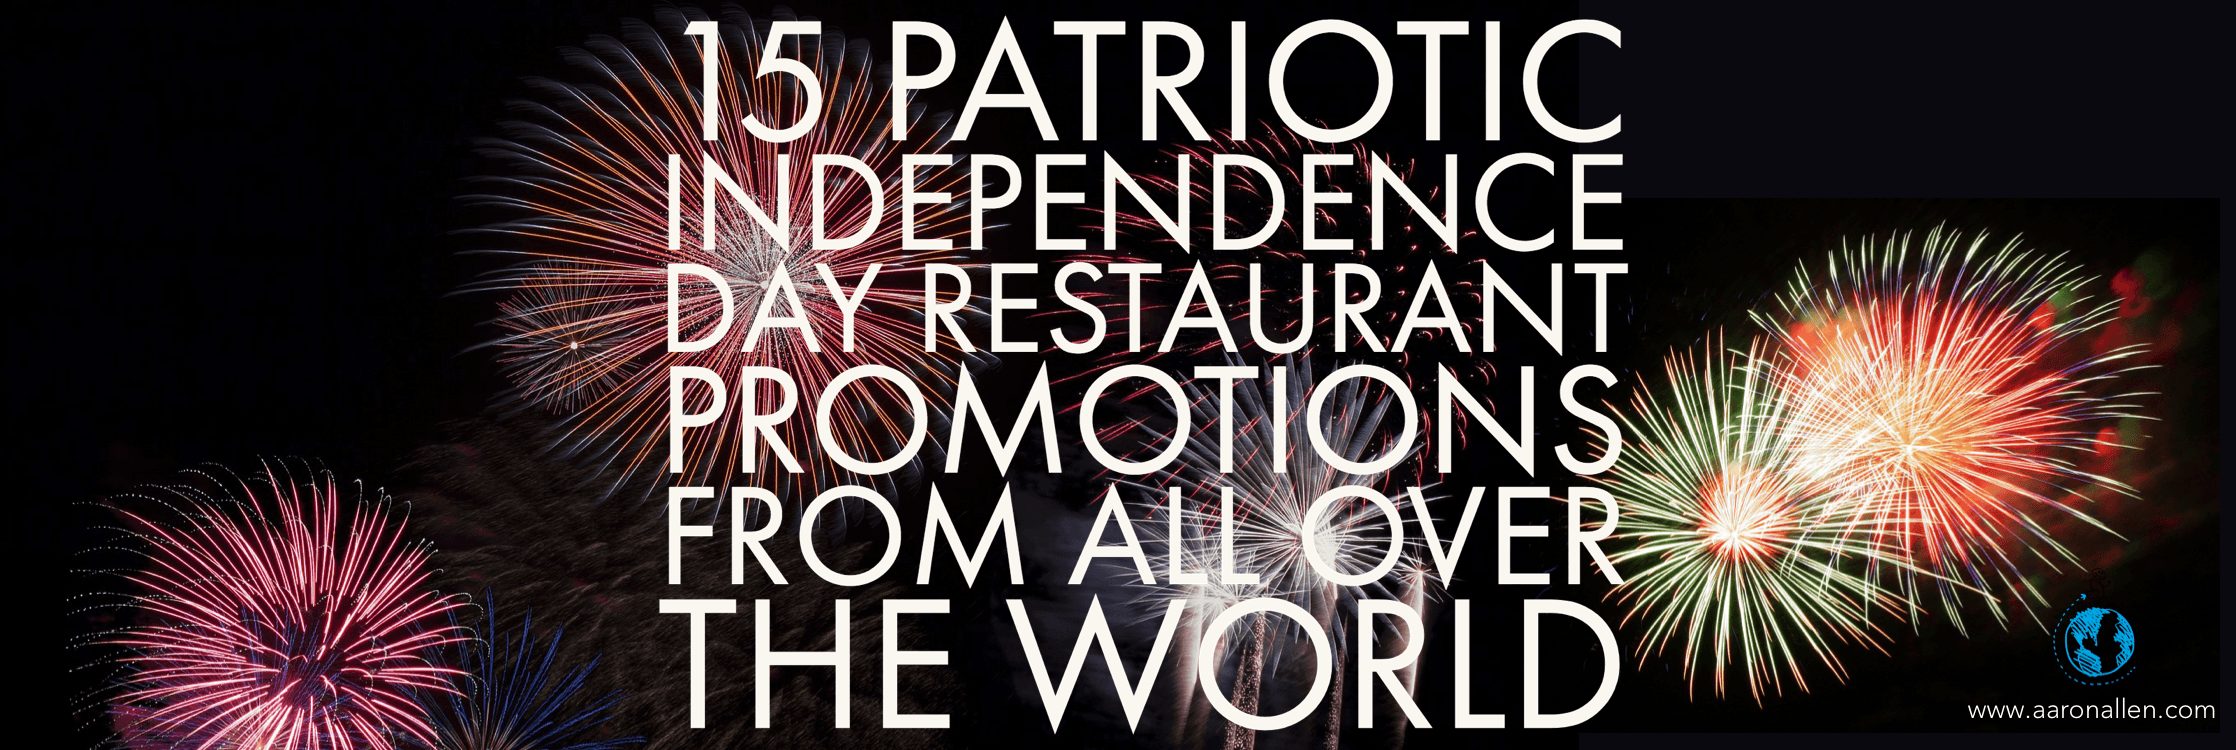 Independence Day Restaurant Marketing Promotions